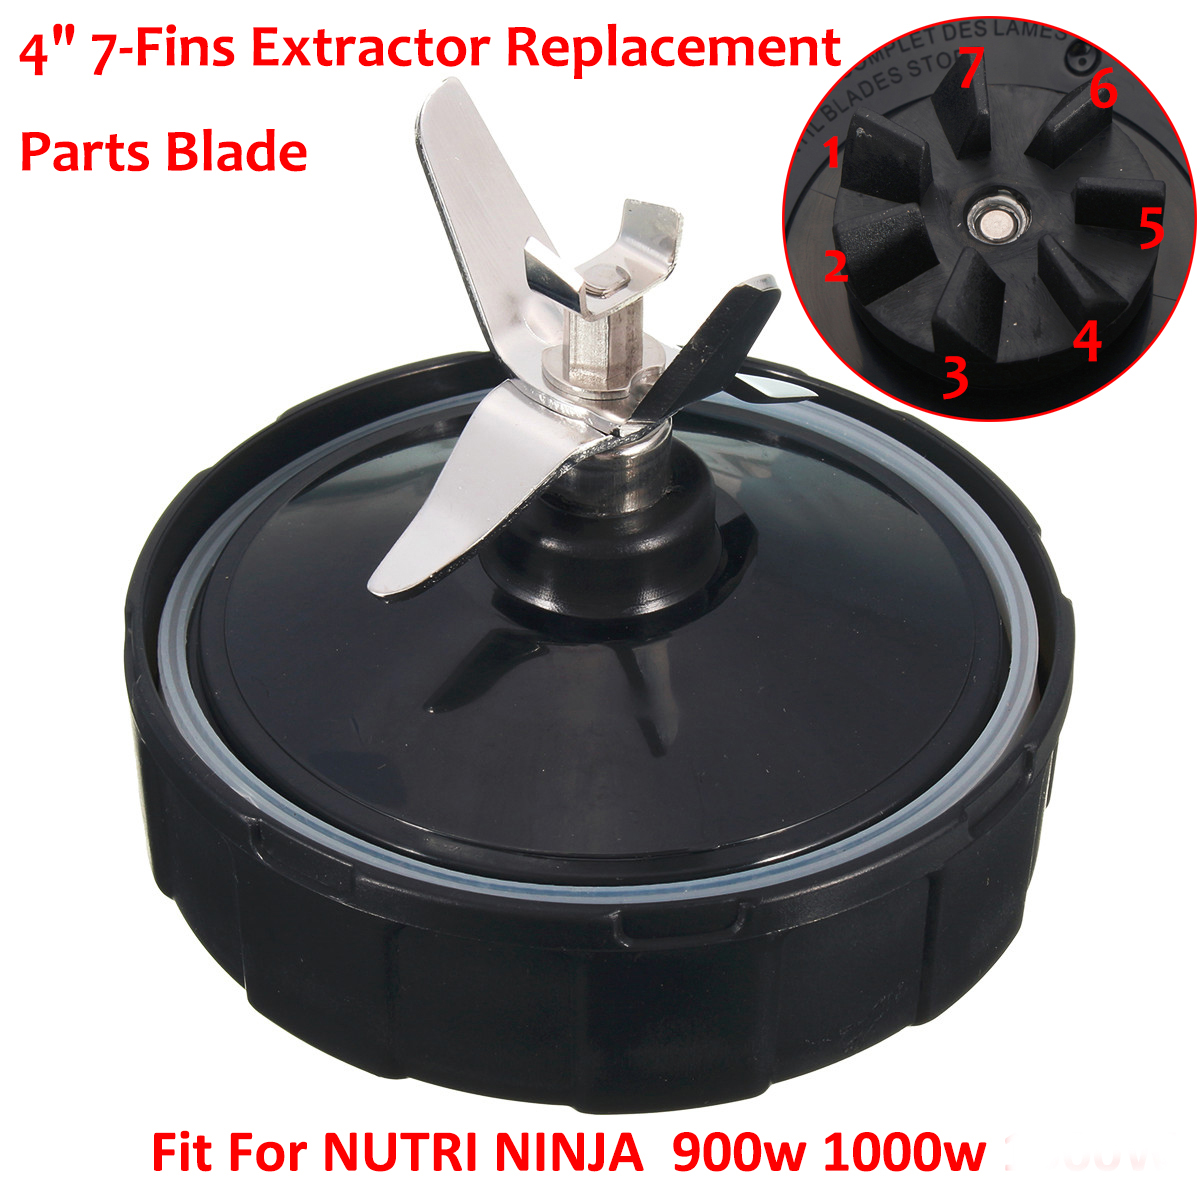 Noblik 7 Fins Extractor Blades for Ninja Blender Replacement Parts with Washer Rubber for Nutri Ninja Auto IQ BL486 BL642 N102 BL682 and More Nutri Ninja Blender